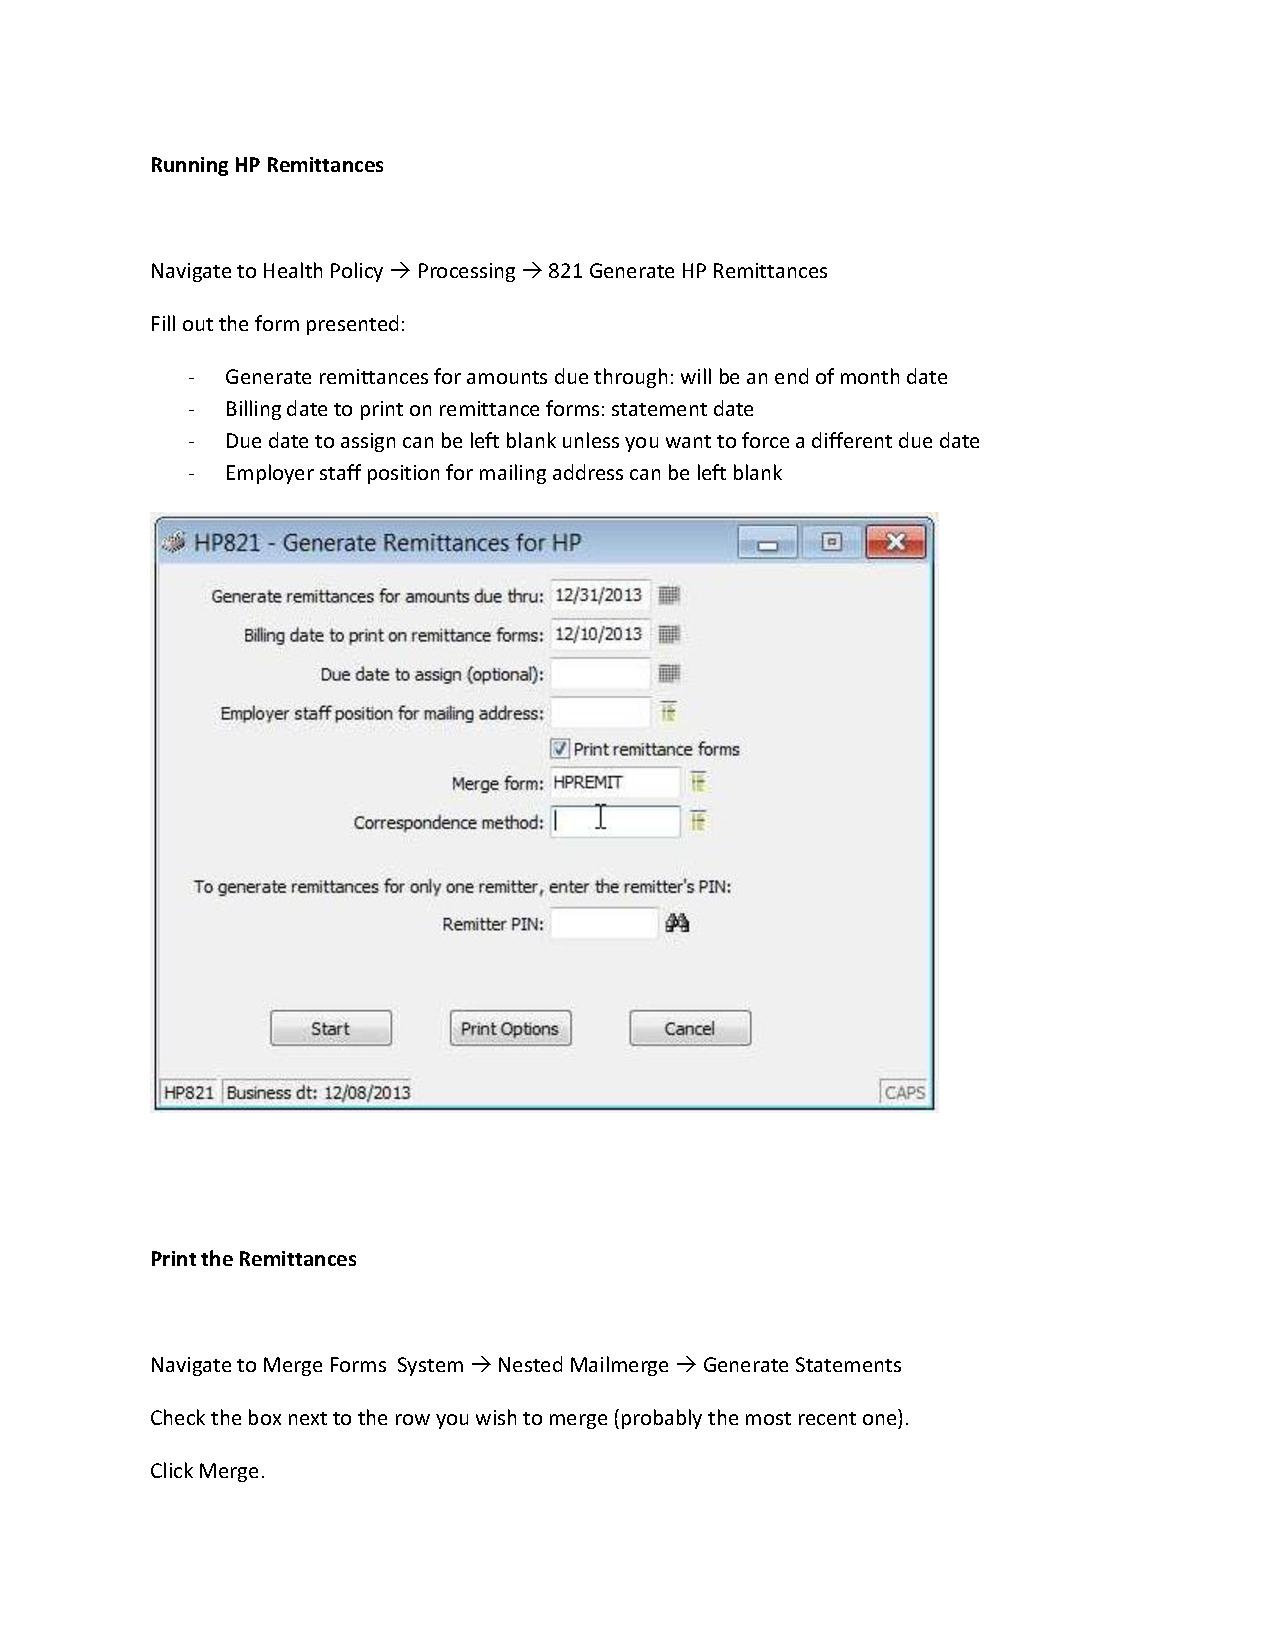 HP821 - Generate Remittances for HP.pdf